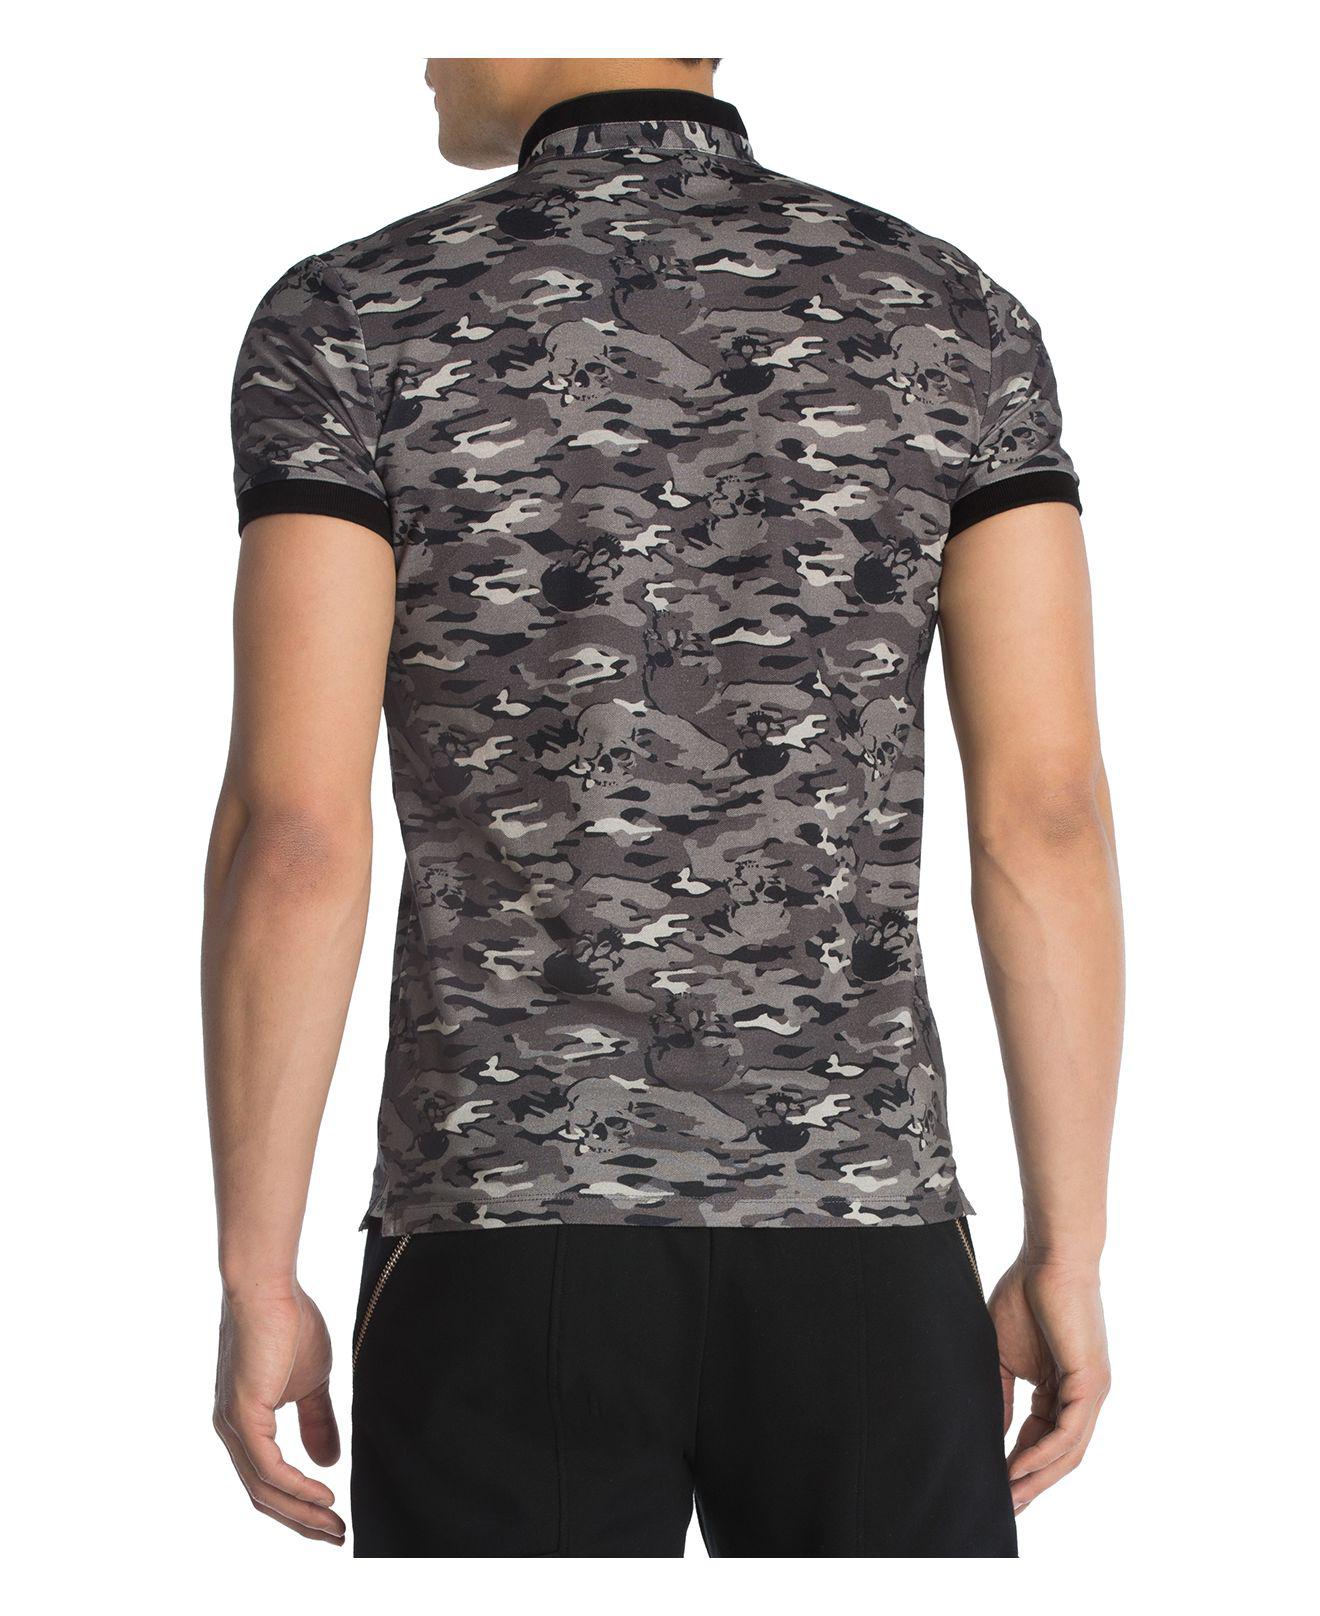 Lyst - The Kooples Pique & Army Print Regular Fit Polo in Gray for Men